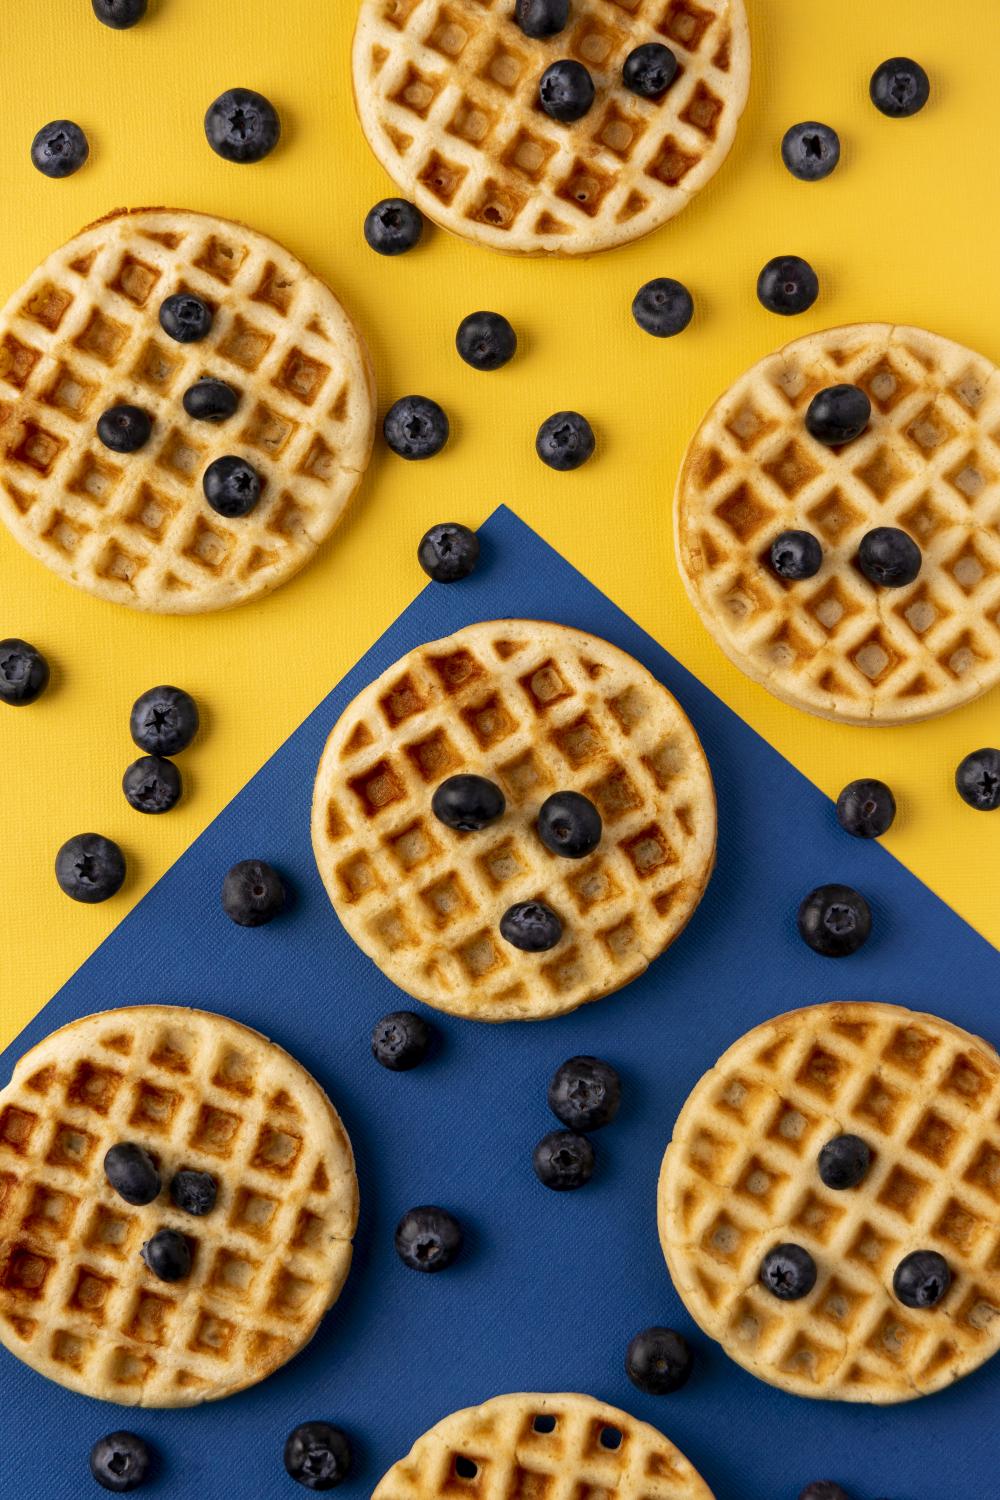 photo of waffles and blueberries on blue and yellow background - photo by Mercedes Gania